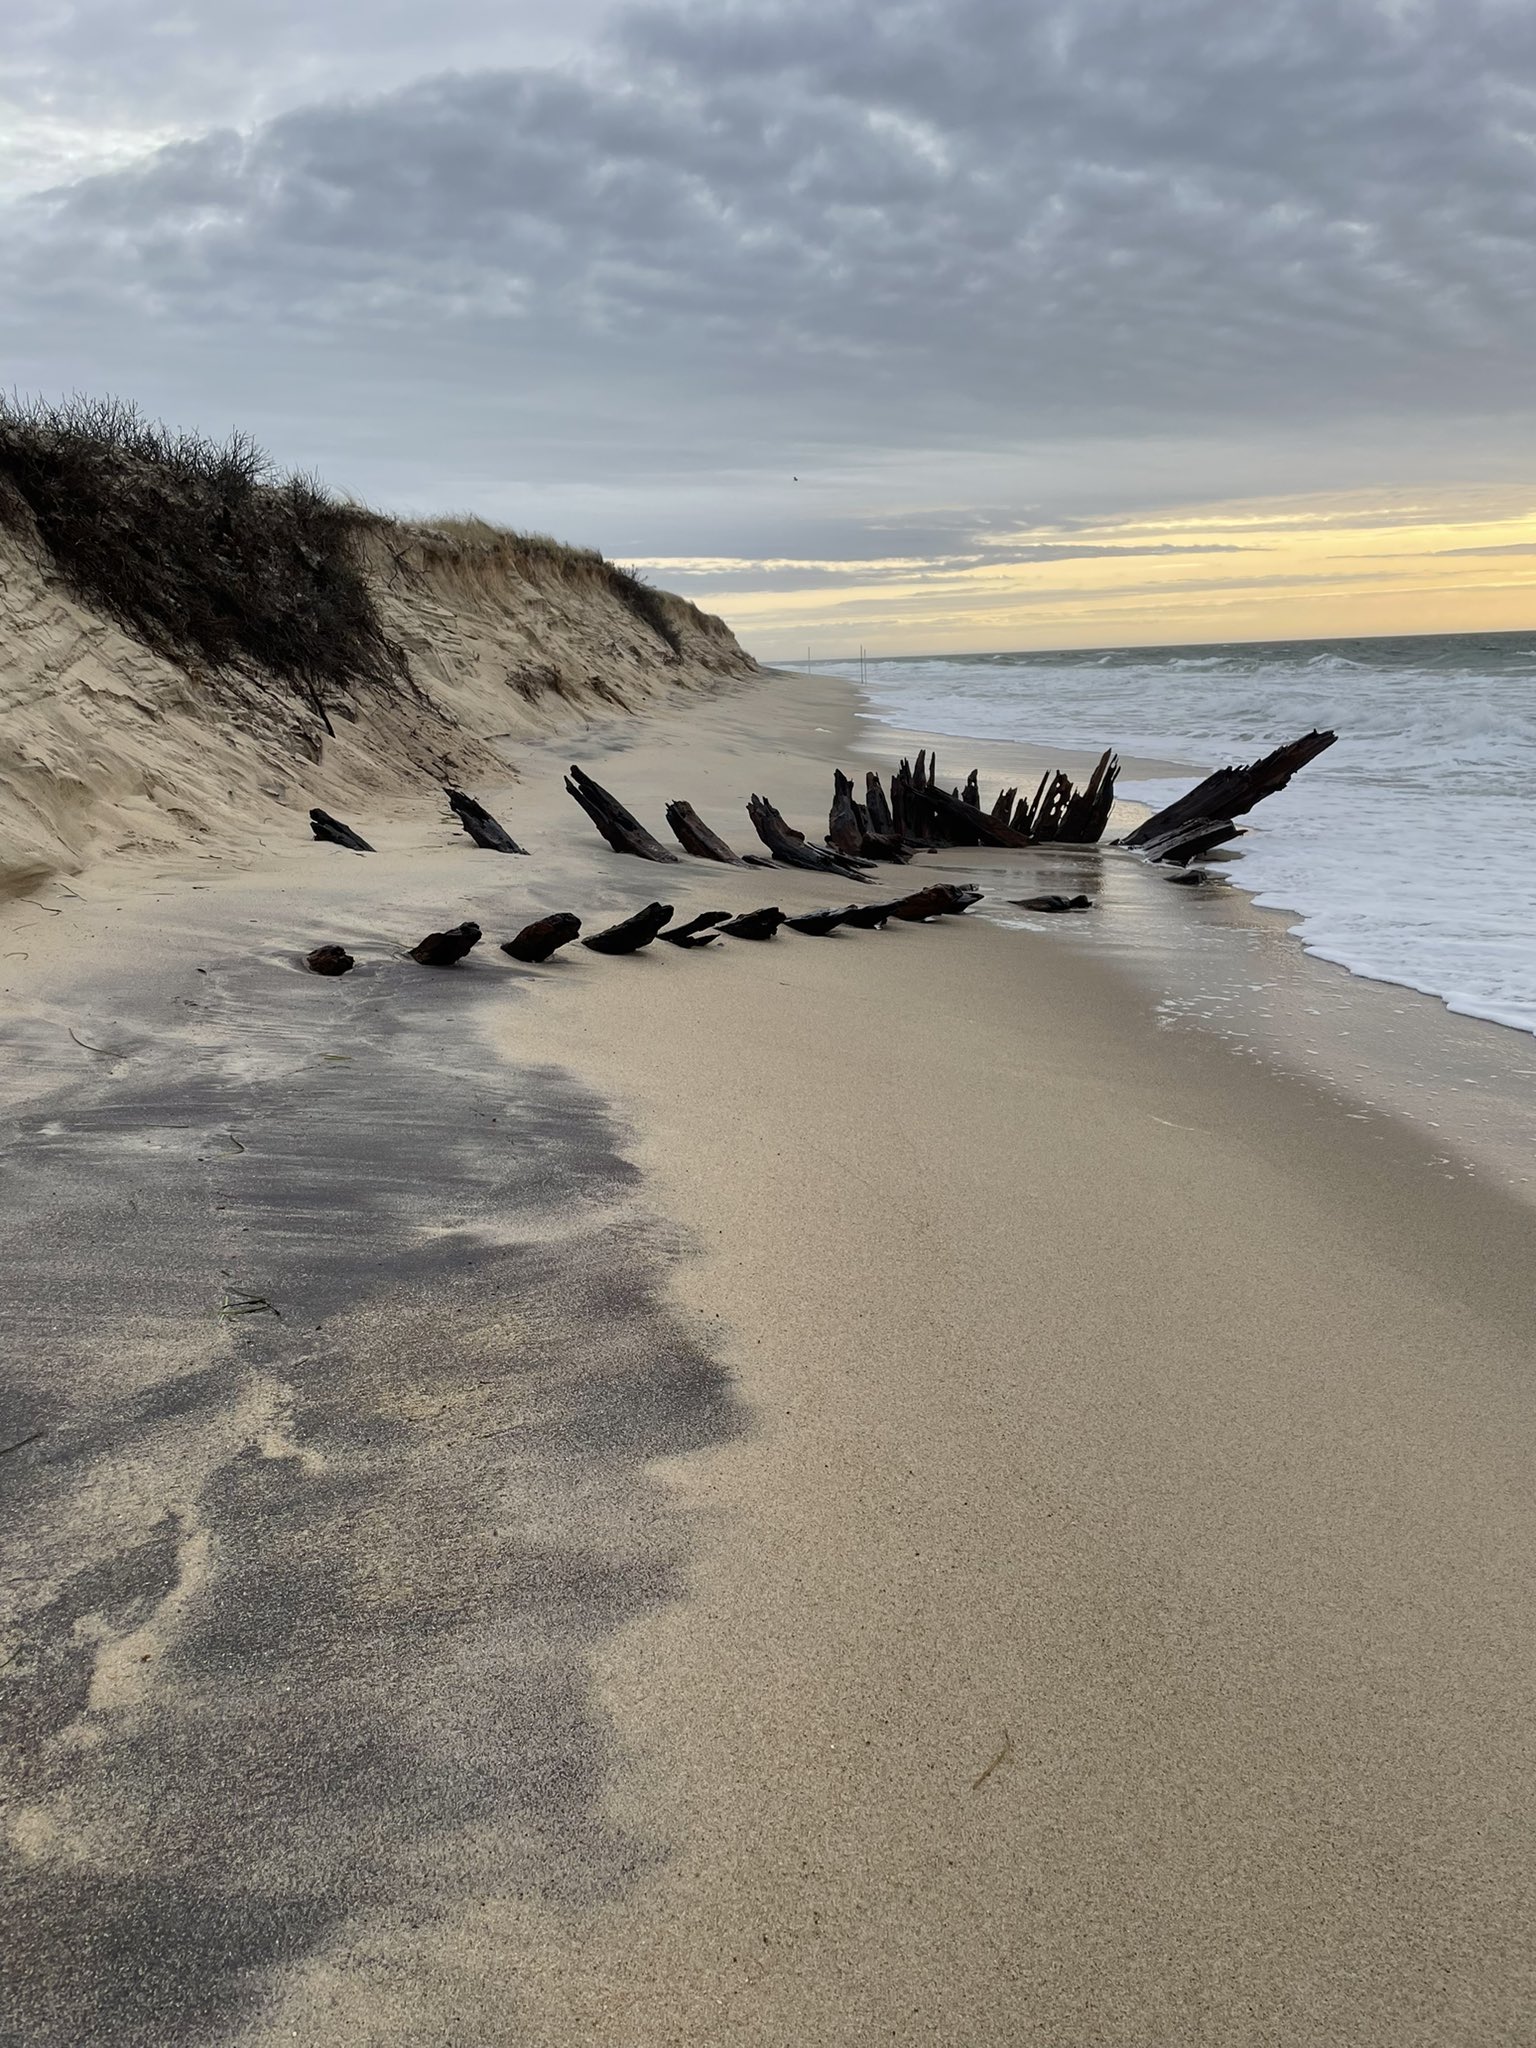 Maritime Archeologists Find Skeletal Remains of Ship From 1800s Emerging  From Sands on Shore of Nantucket